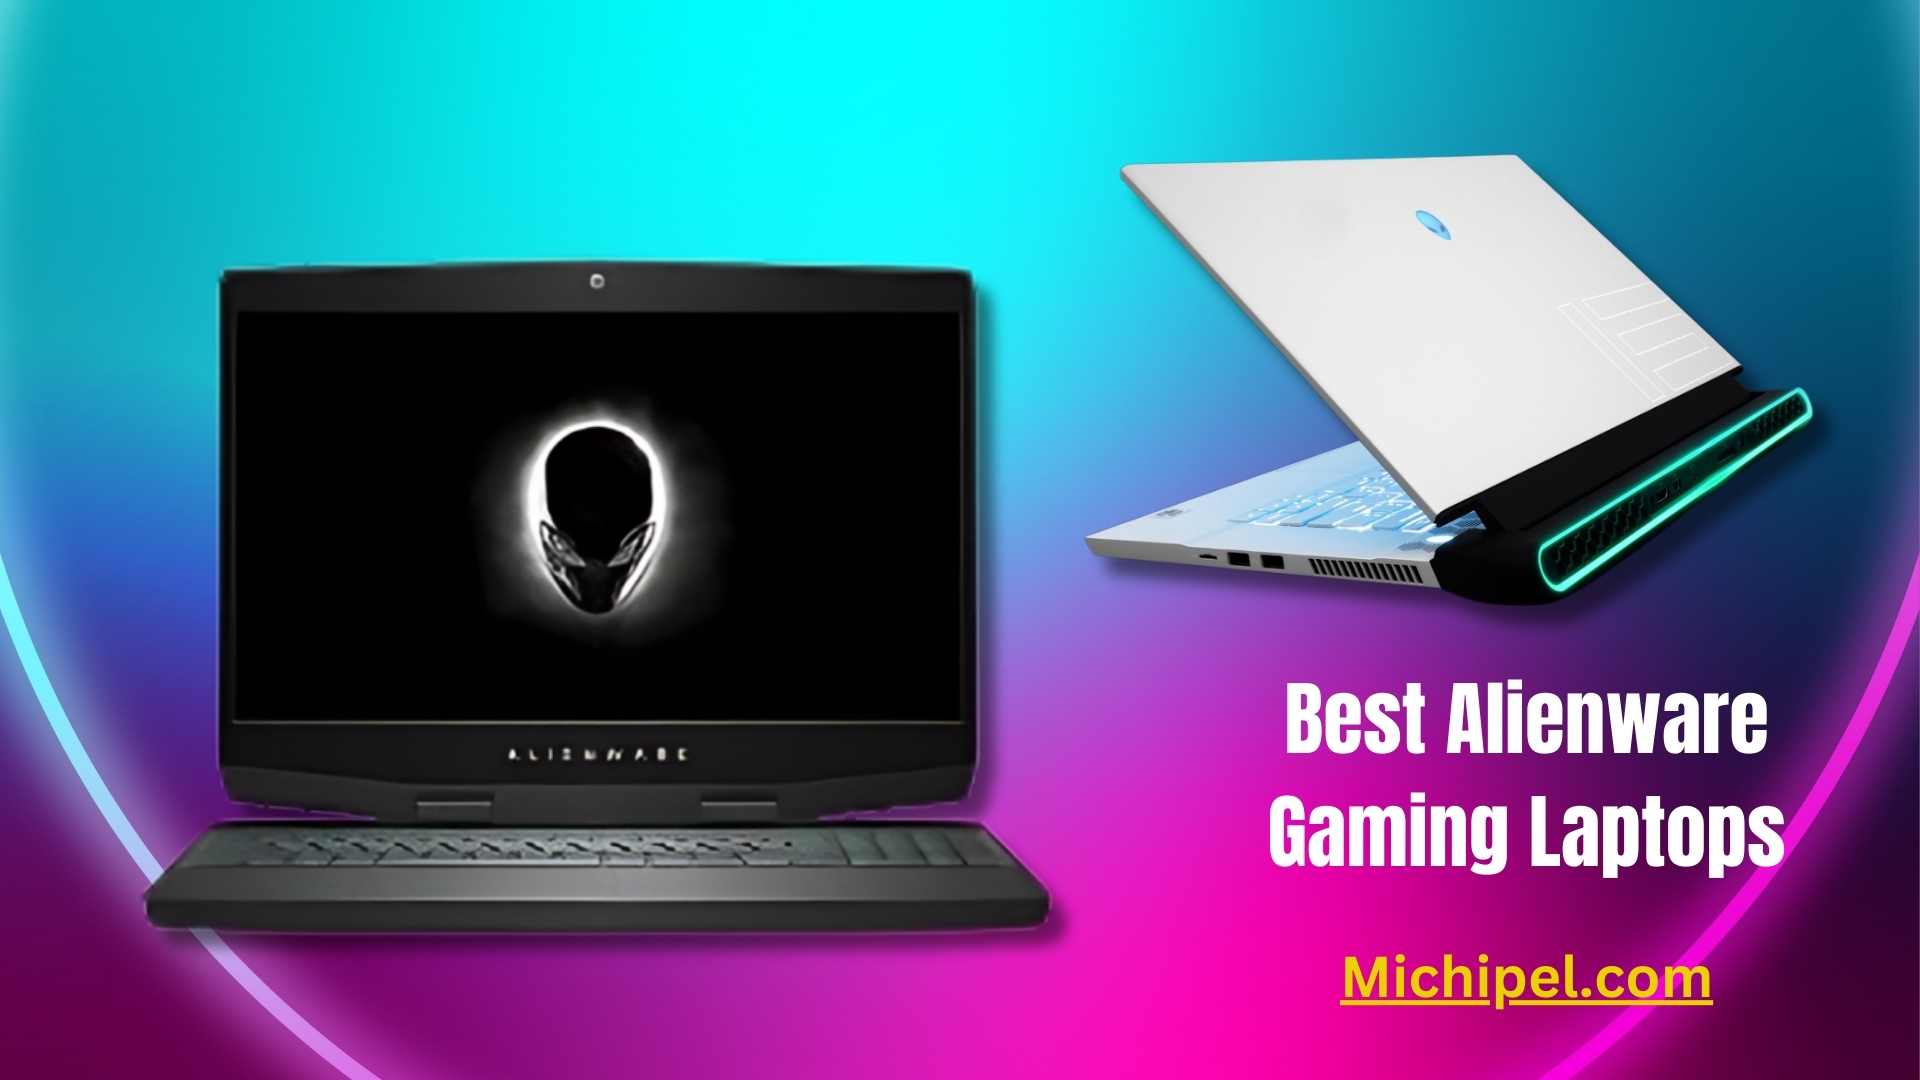 Best Alienware Gaming Laptops: A Gaming Laptop Guide